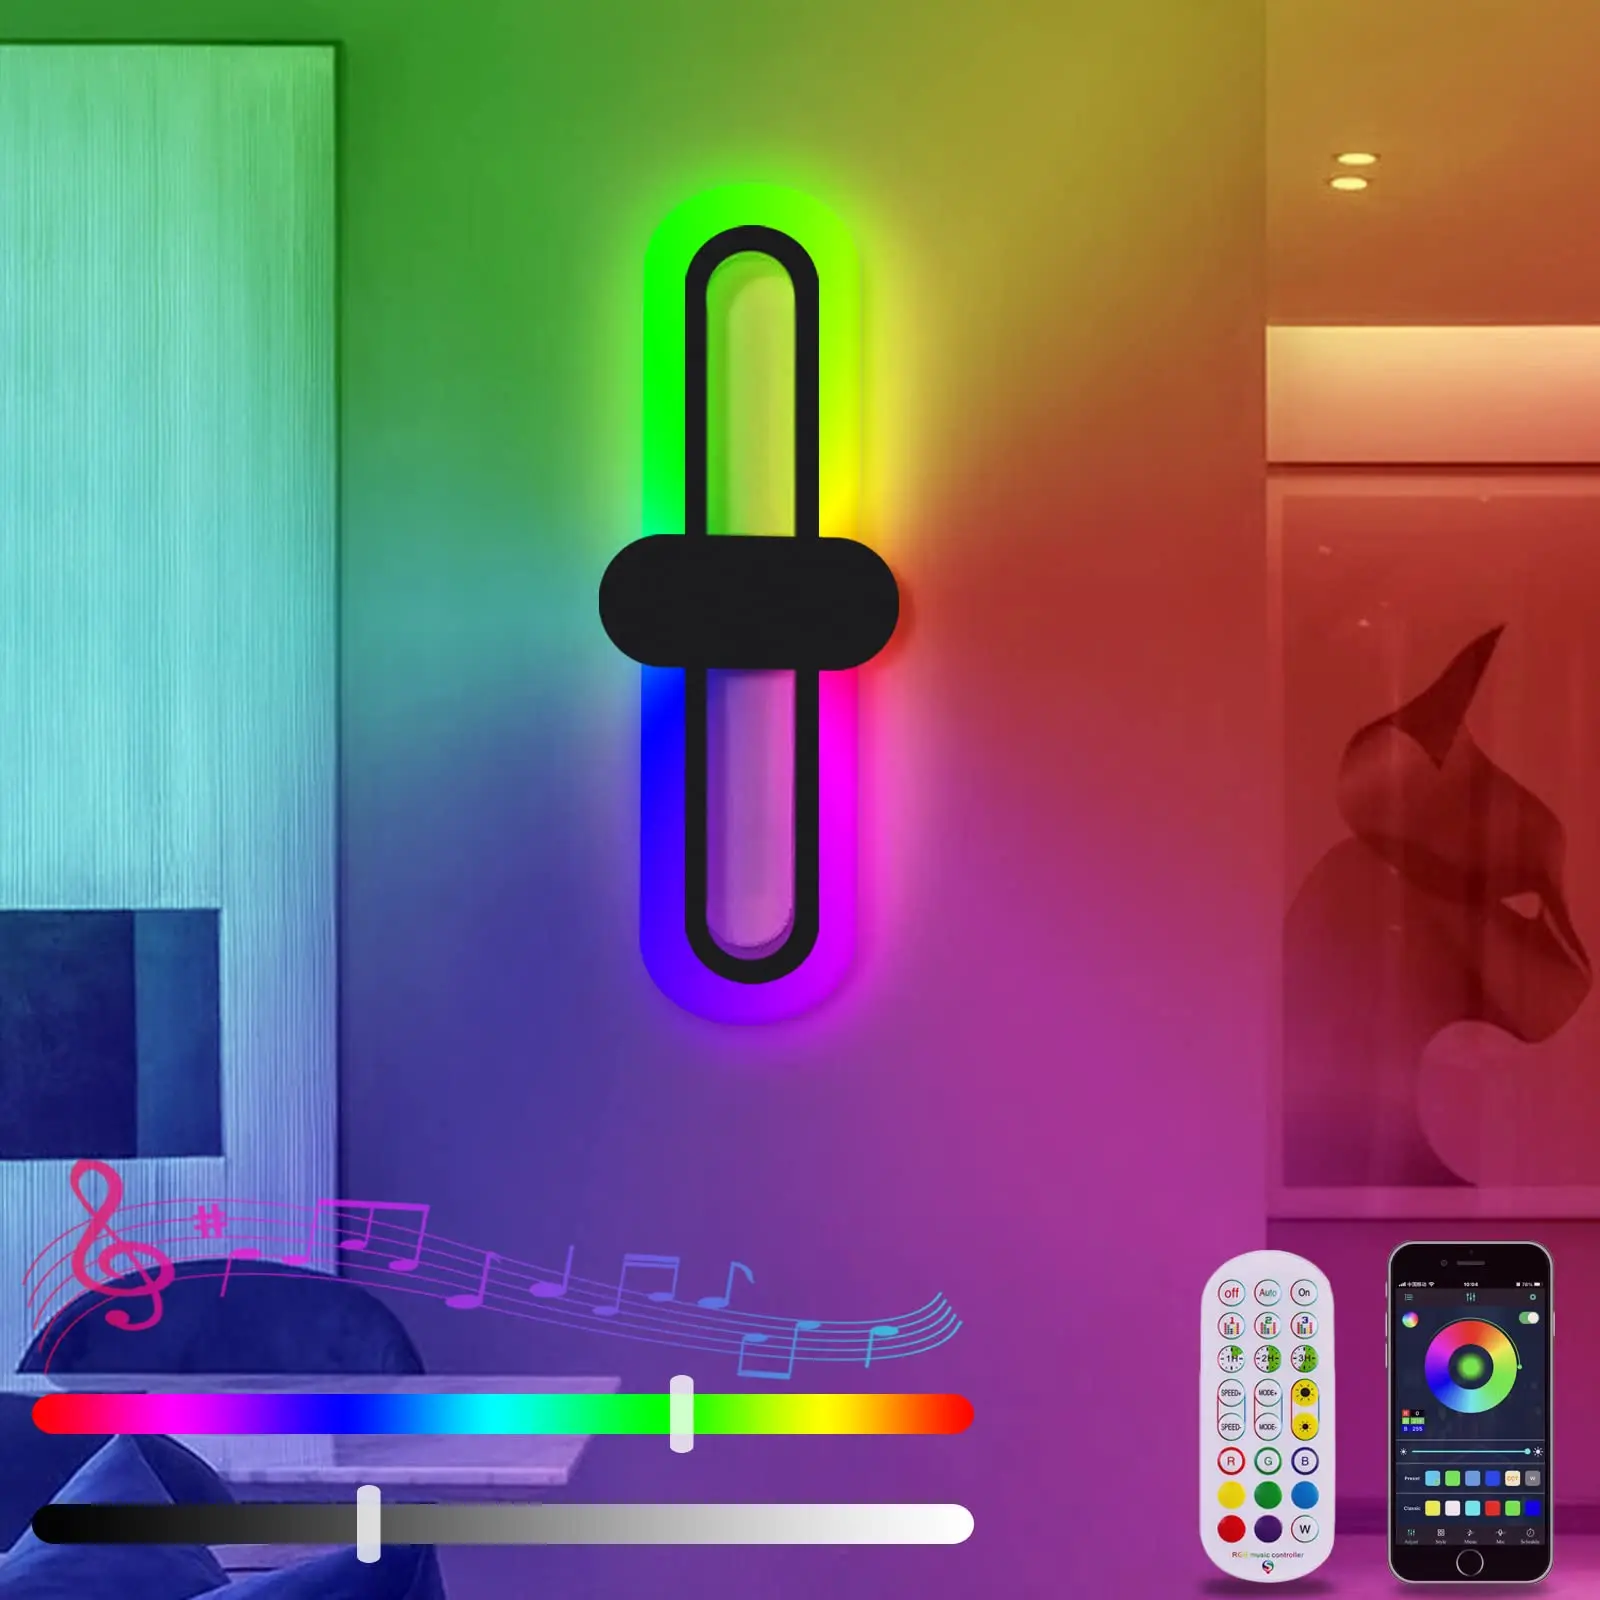 

LED Wall Light Indoor Dimmable Wall Lamp with Remote Control App Control Rgb Colour Change Lamp Musical Decorative Wall Lighting